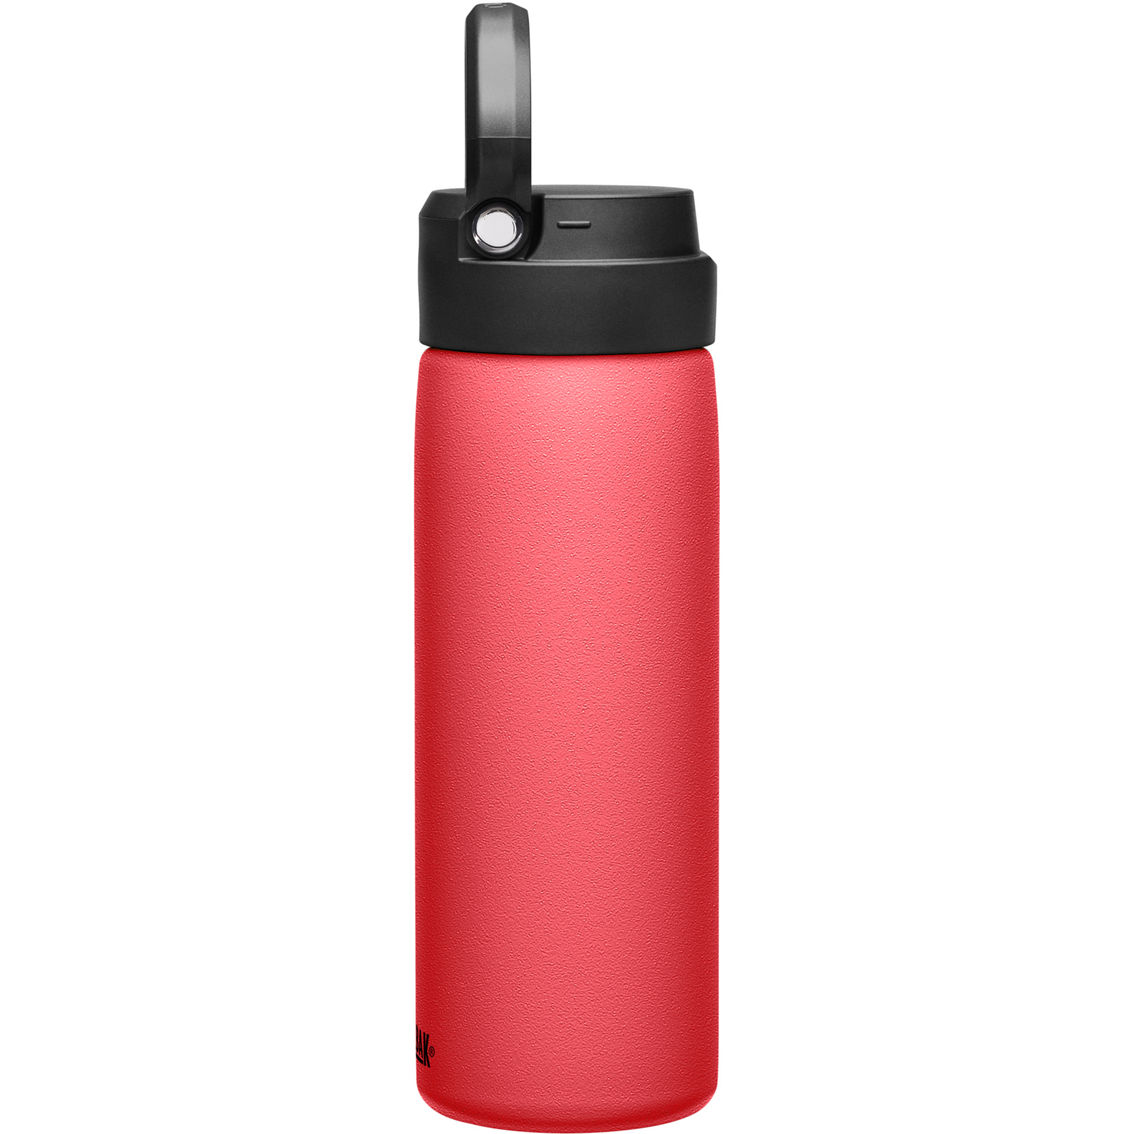 Camelbak Fit Cap Insulated Stainless Steel 20 oz. Water Bottle - Image 4 of 8